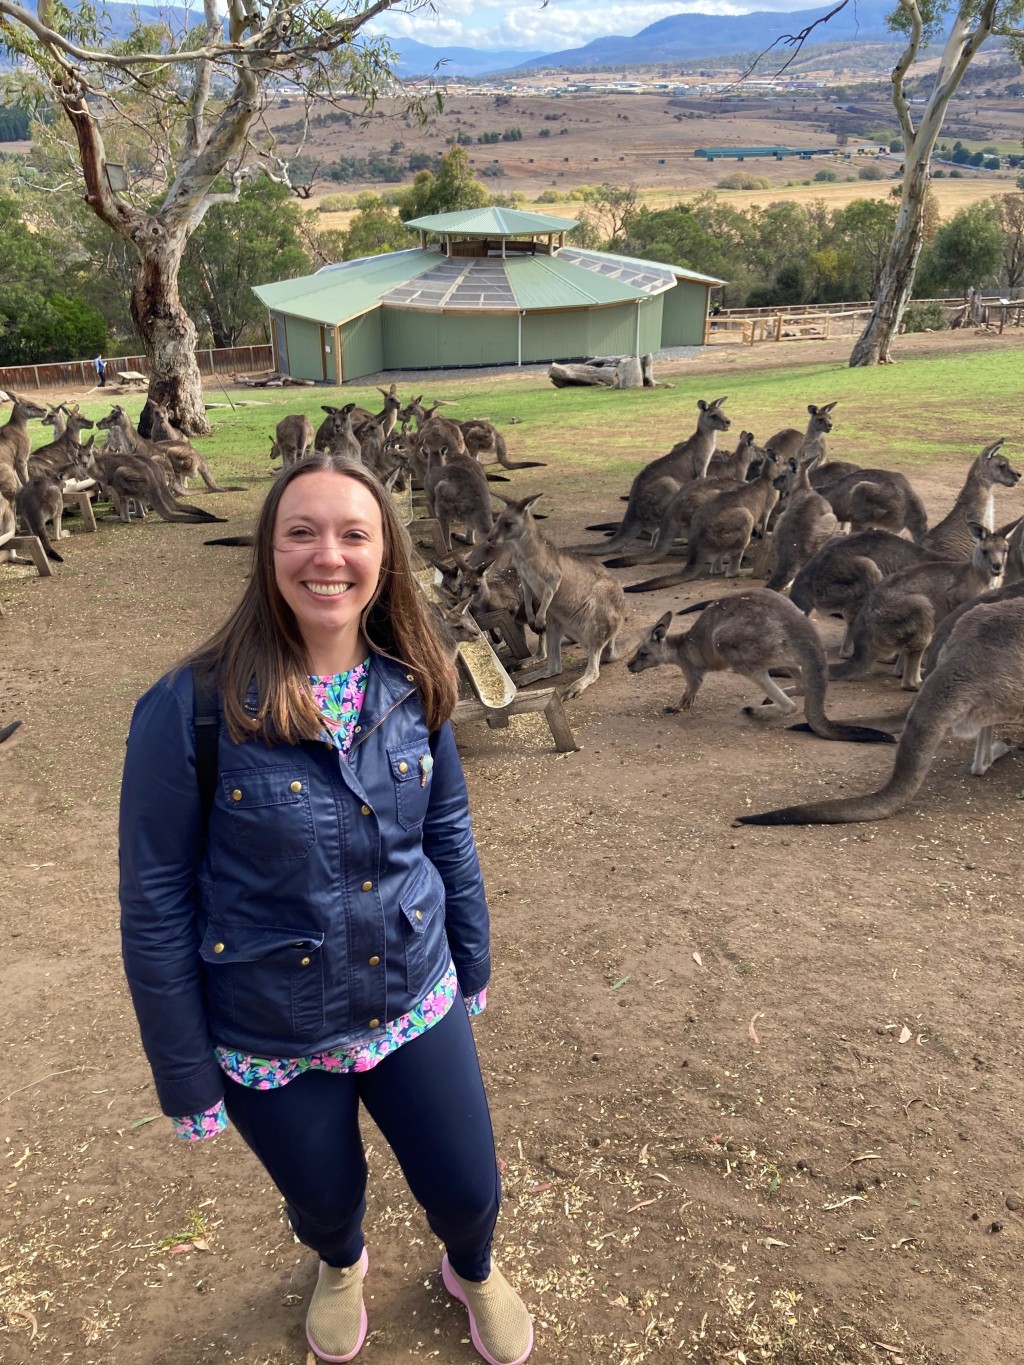 UNE professor Patricia Thibodeau poses with kangaroos in the background